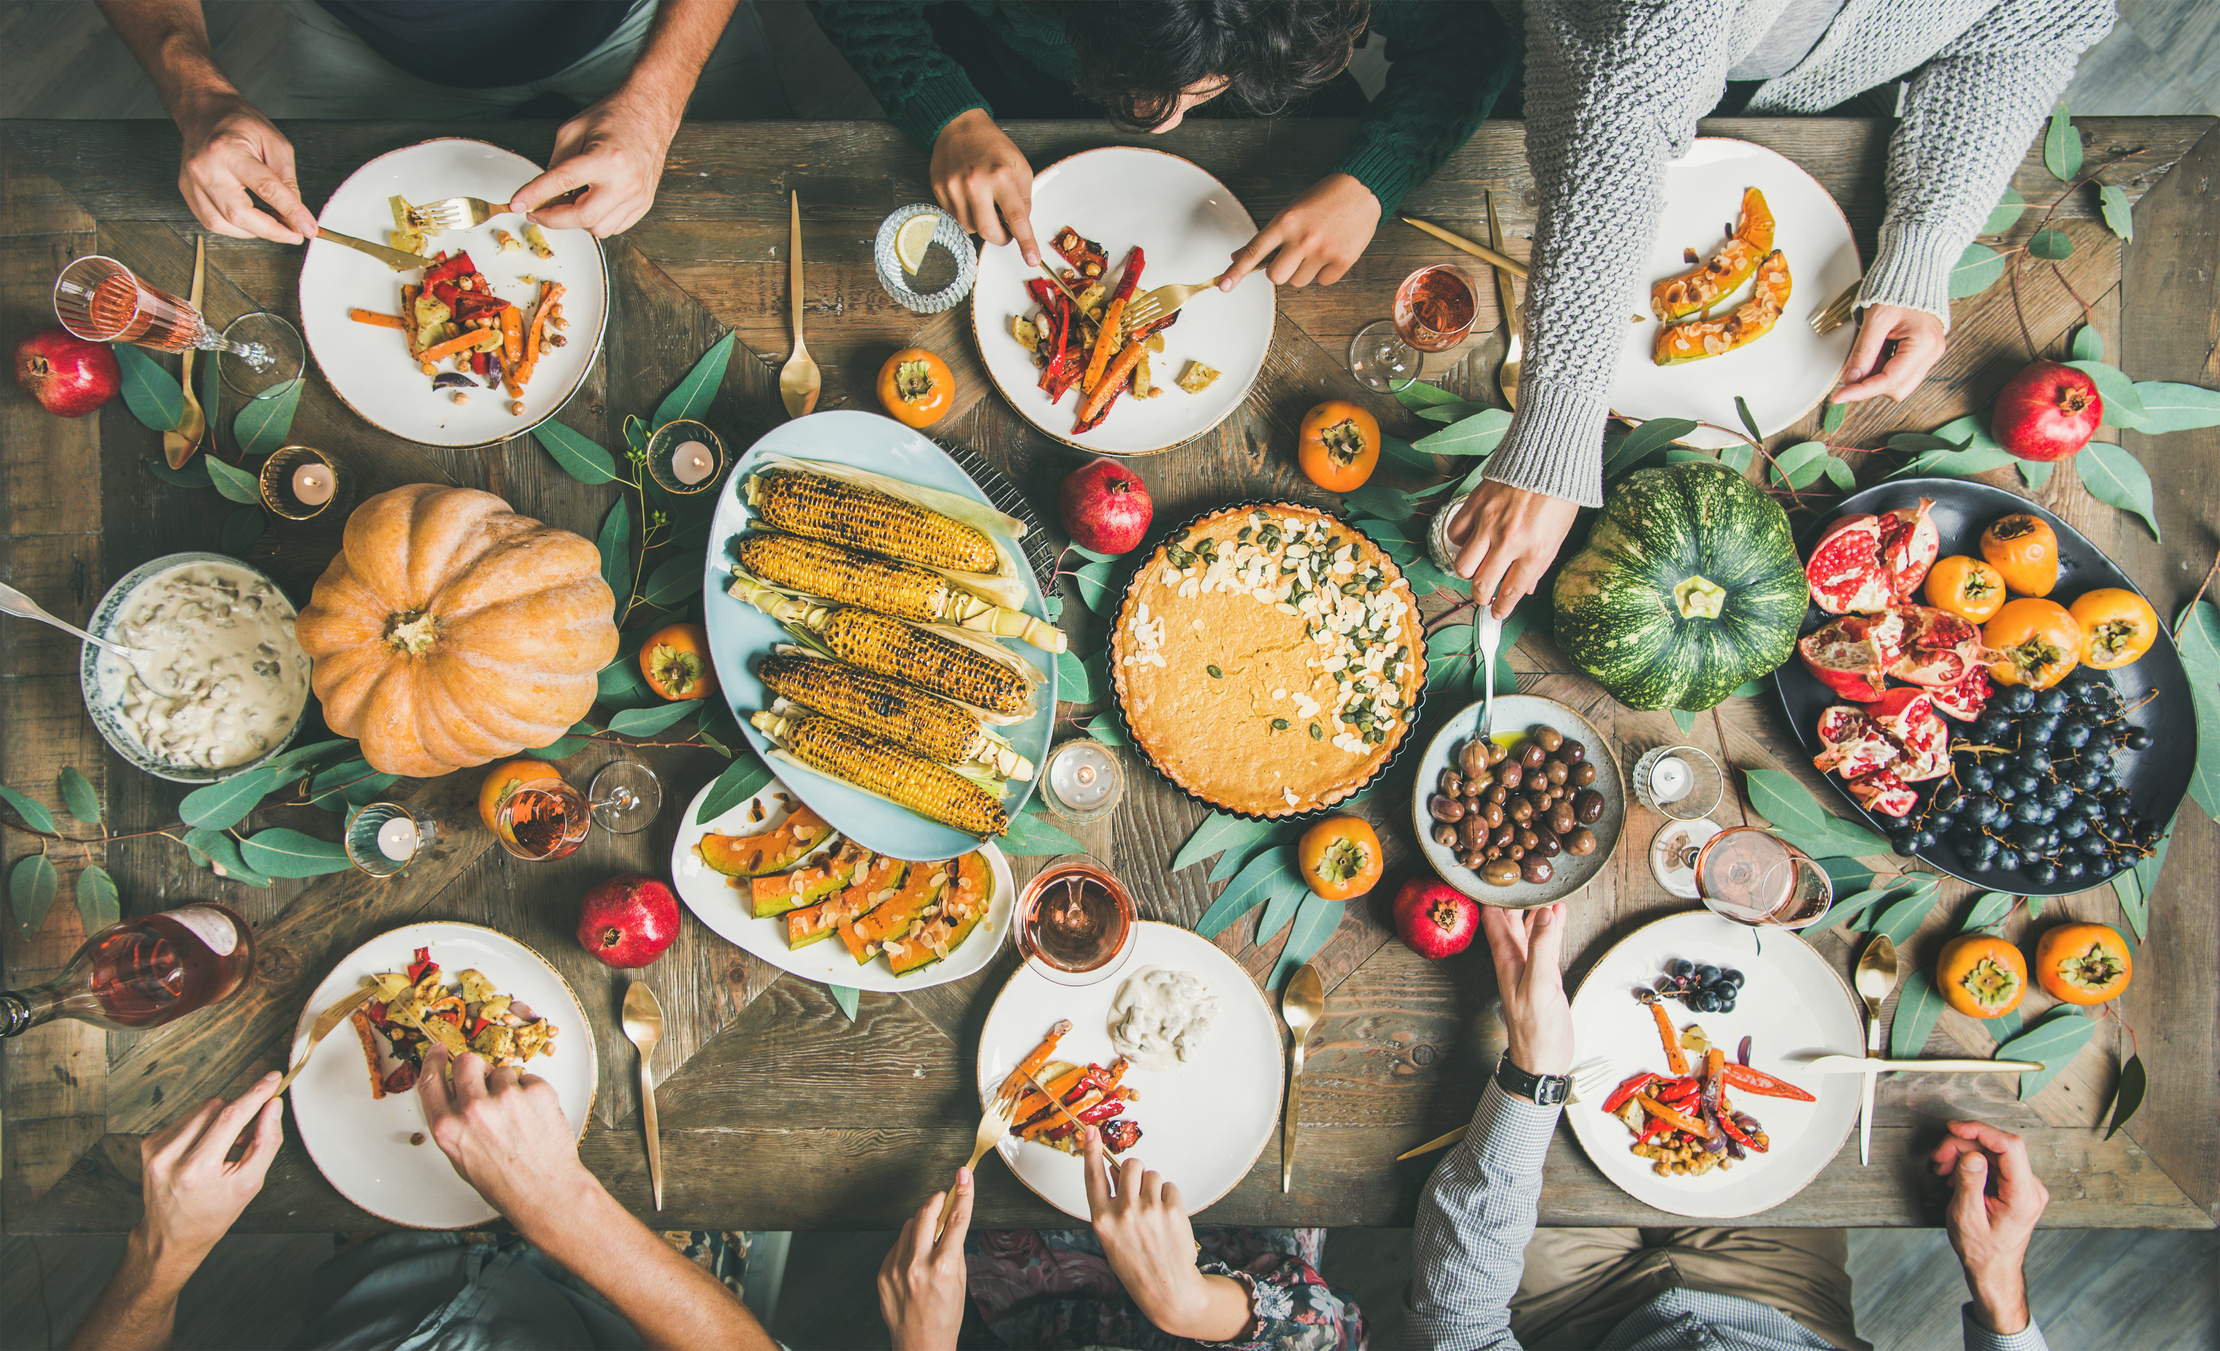 15 Ways to Have a More Environmentally Friendly Thanksgiving 2021